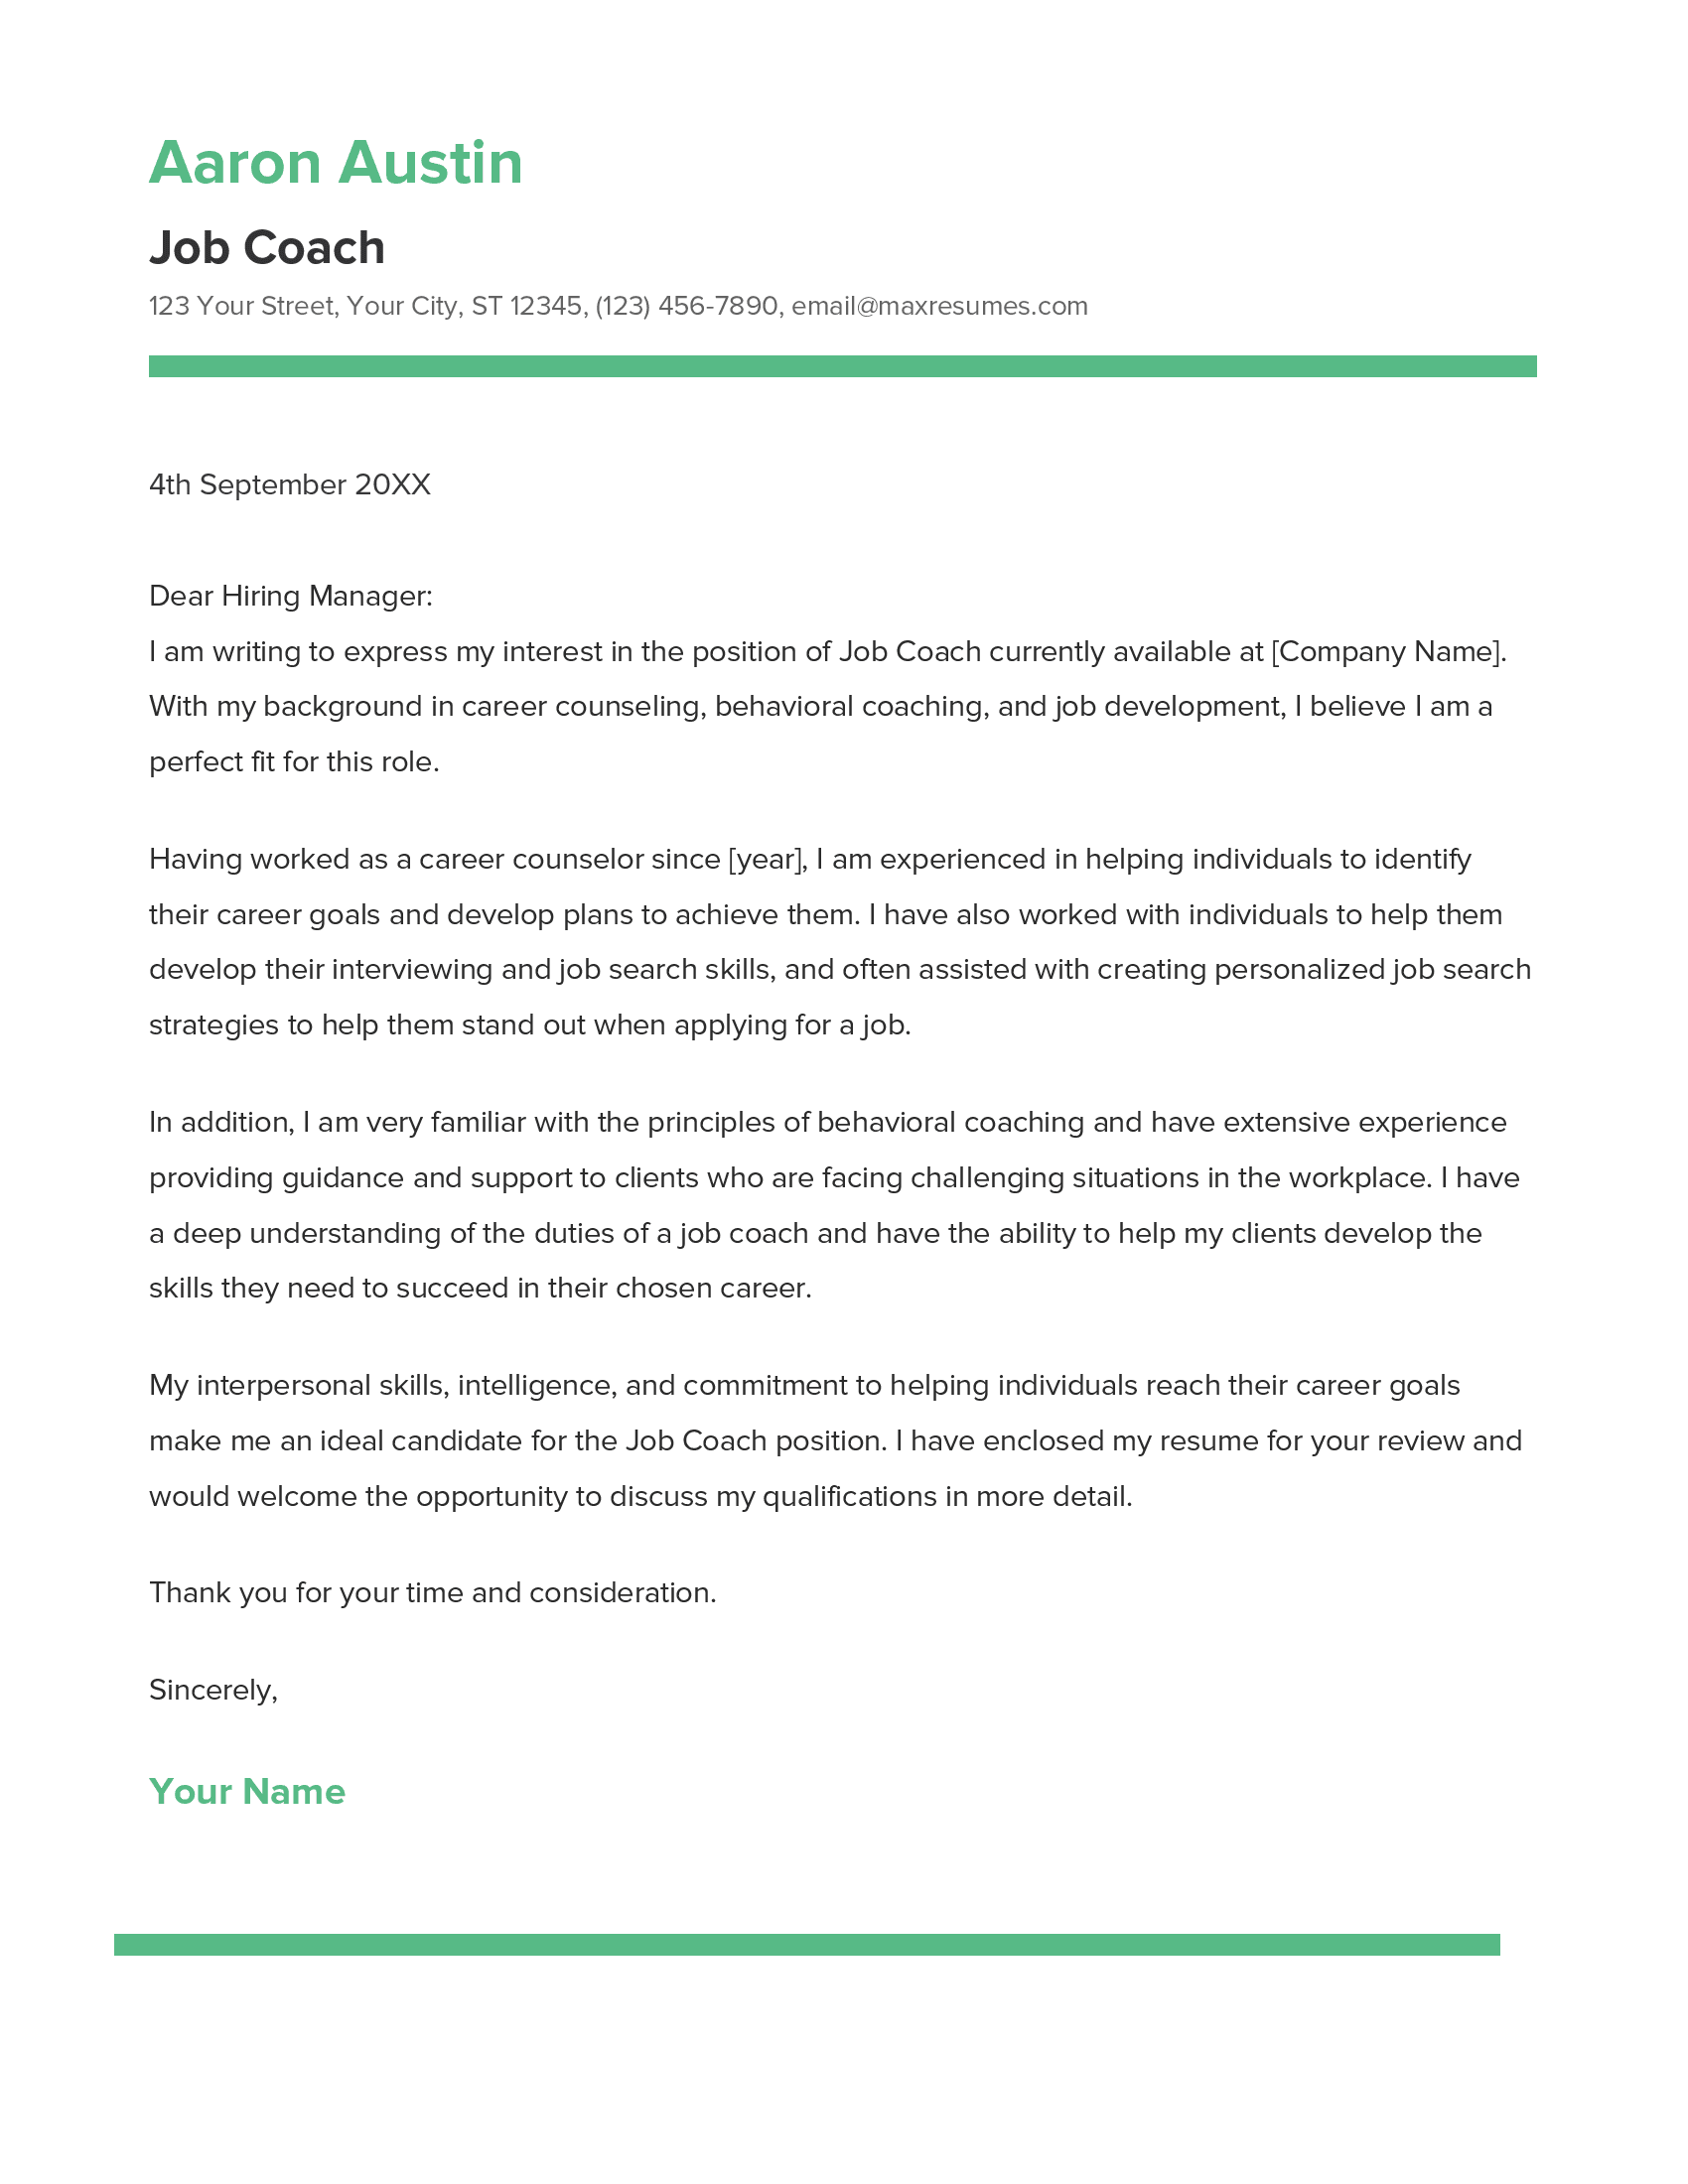 Job Coach Cover Letter Example